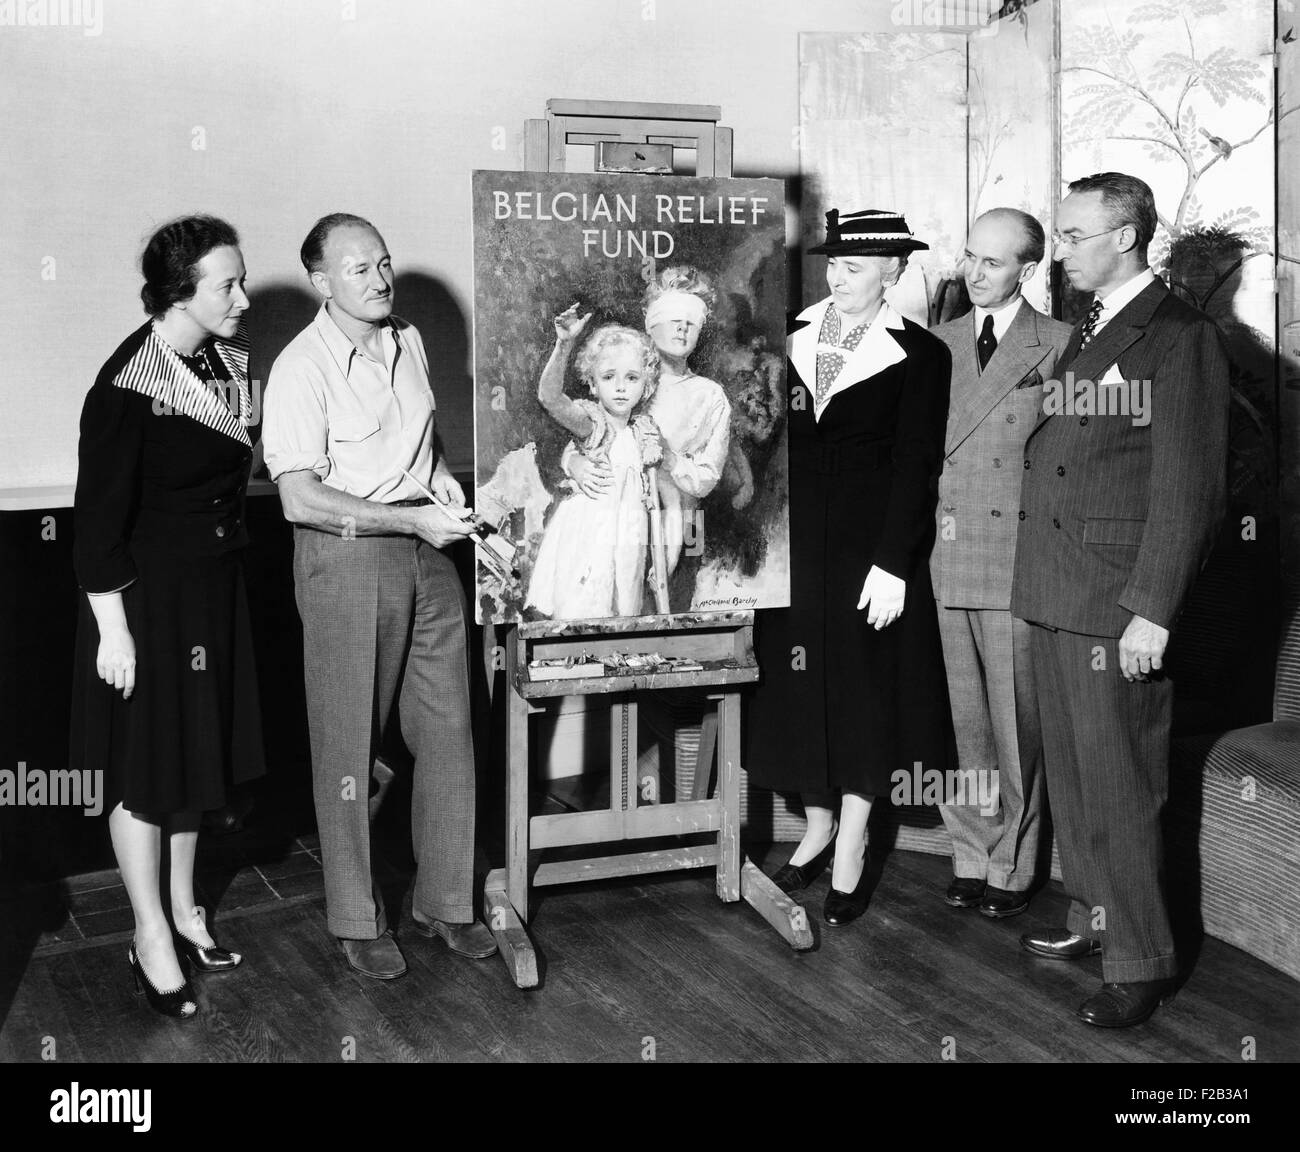 McClelland Barclay illustrated the official poster of the Belgian Relief Fund, Inc. In June 1940, after Hitler's conquest of Western Europe, the Fund unified American relief efforts in behalf of the Belgian refugees. L-R: Ms. Suzanne Silvercruys Stevenson; Mr. Barclay; Mme. Charles Jannsen; Milton M. Brown; and Perrin C. Calpin. - (CSU 2015 6 217) Stock Photo